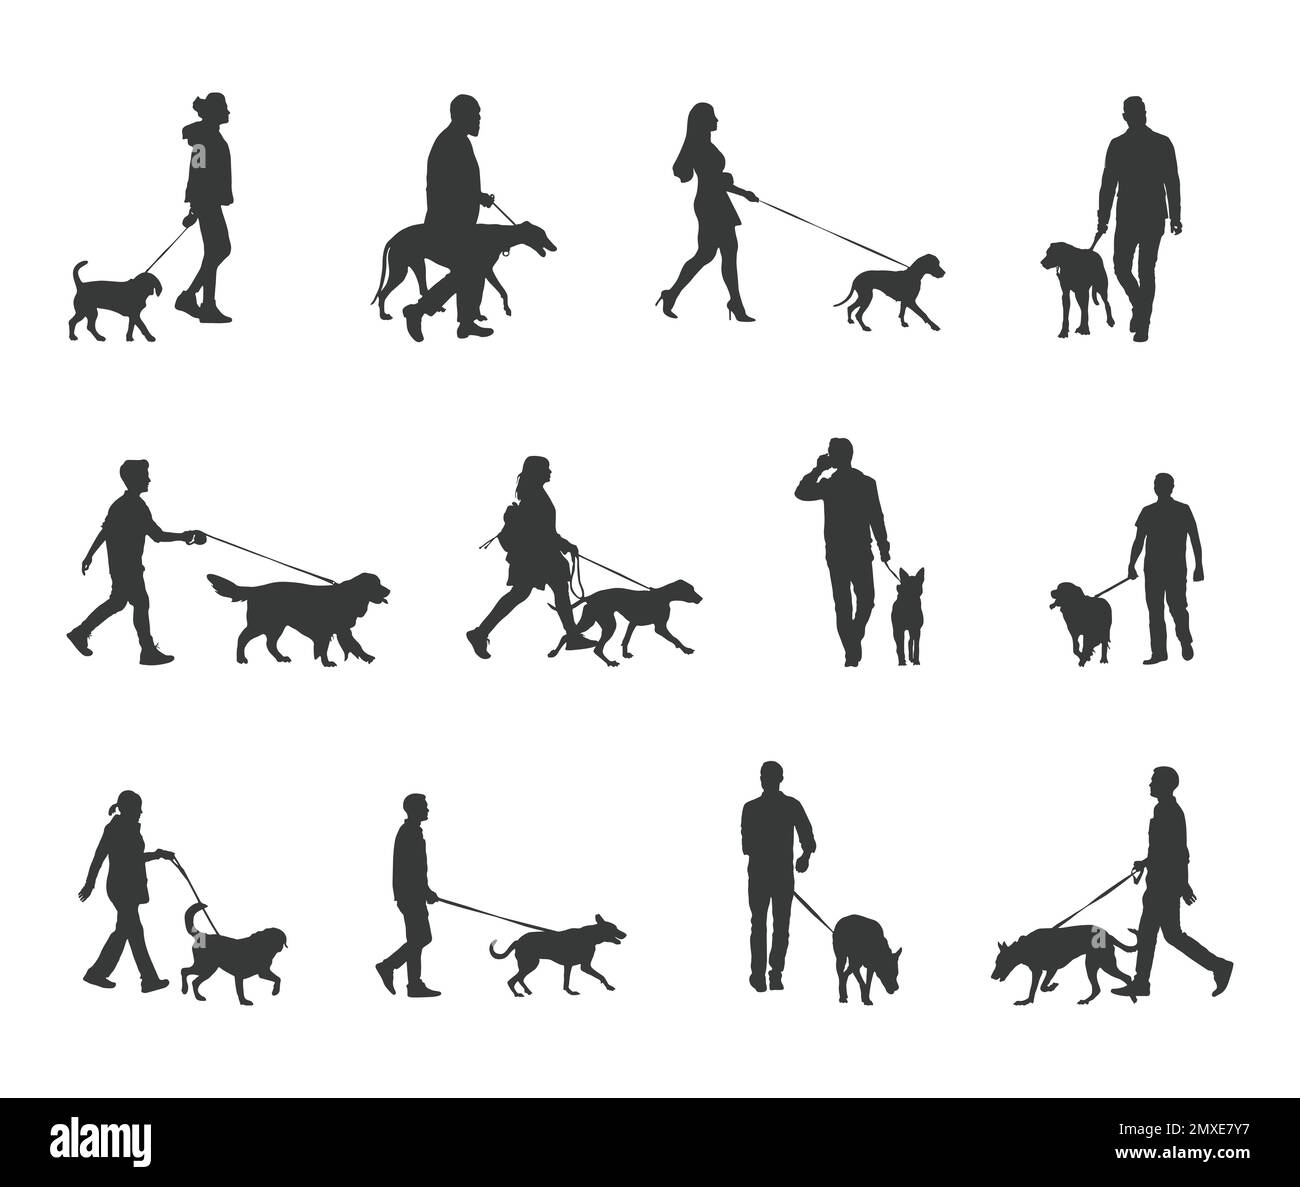 Walk with dog silhouettes, People walking with dog silhouettes Stock Vector